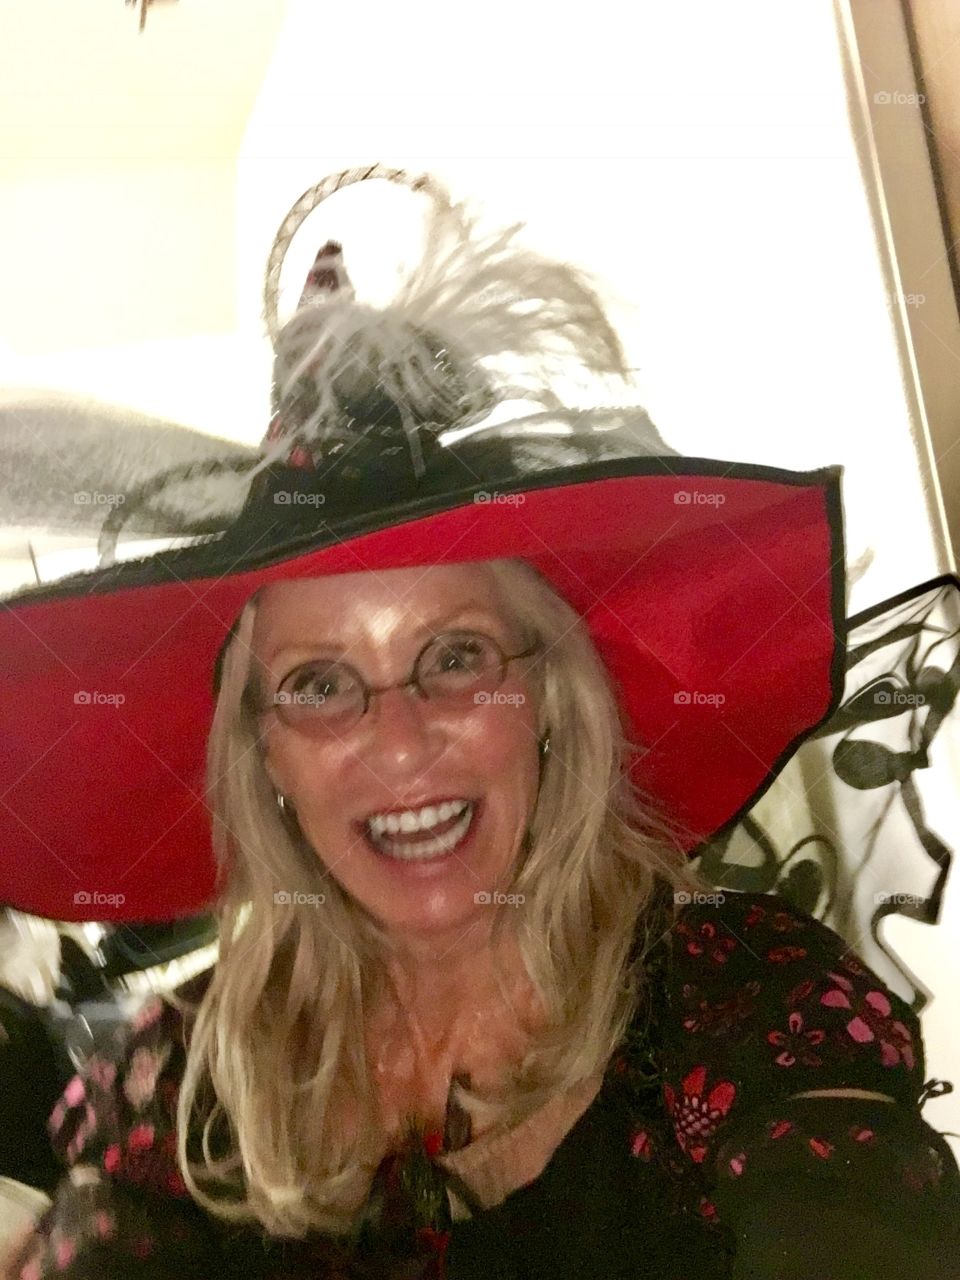 Age is just a number. Born 1955, finding my inner child for Halloween 